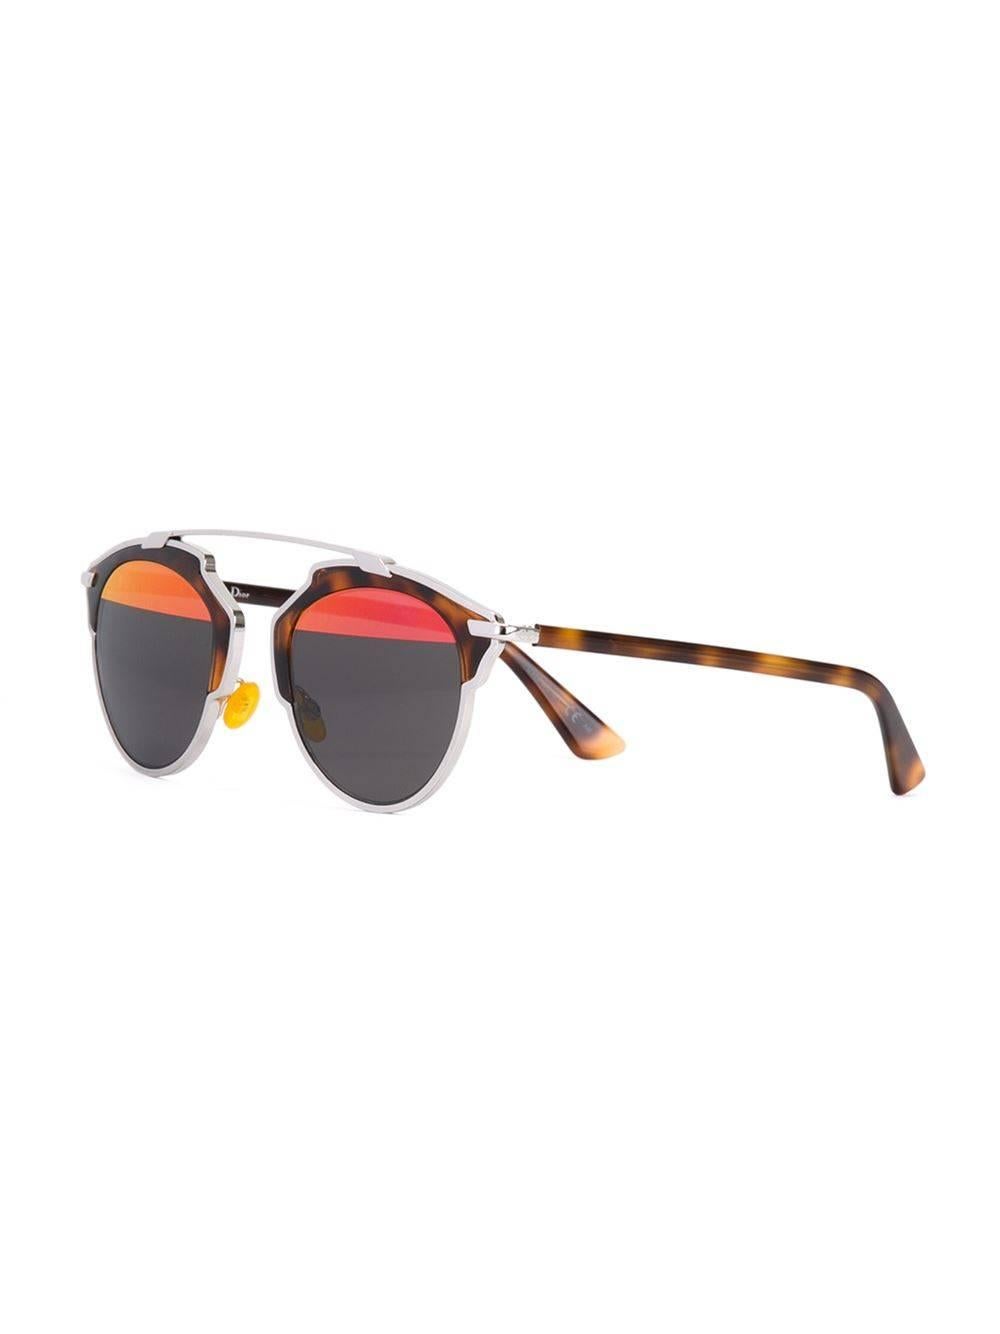 Tortoiseshell and silver-tone top bar sunglasses featuring mirrored lenses, a thin top bar and straight arms with angled tips. This item comes with a protective case.

Colour: Multi

Material: Acetate 100% Metal (Other) 100%

Measurements: